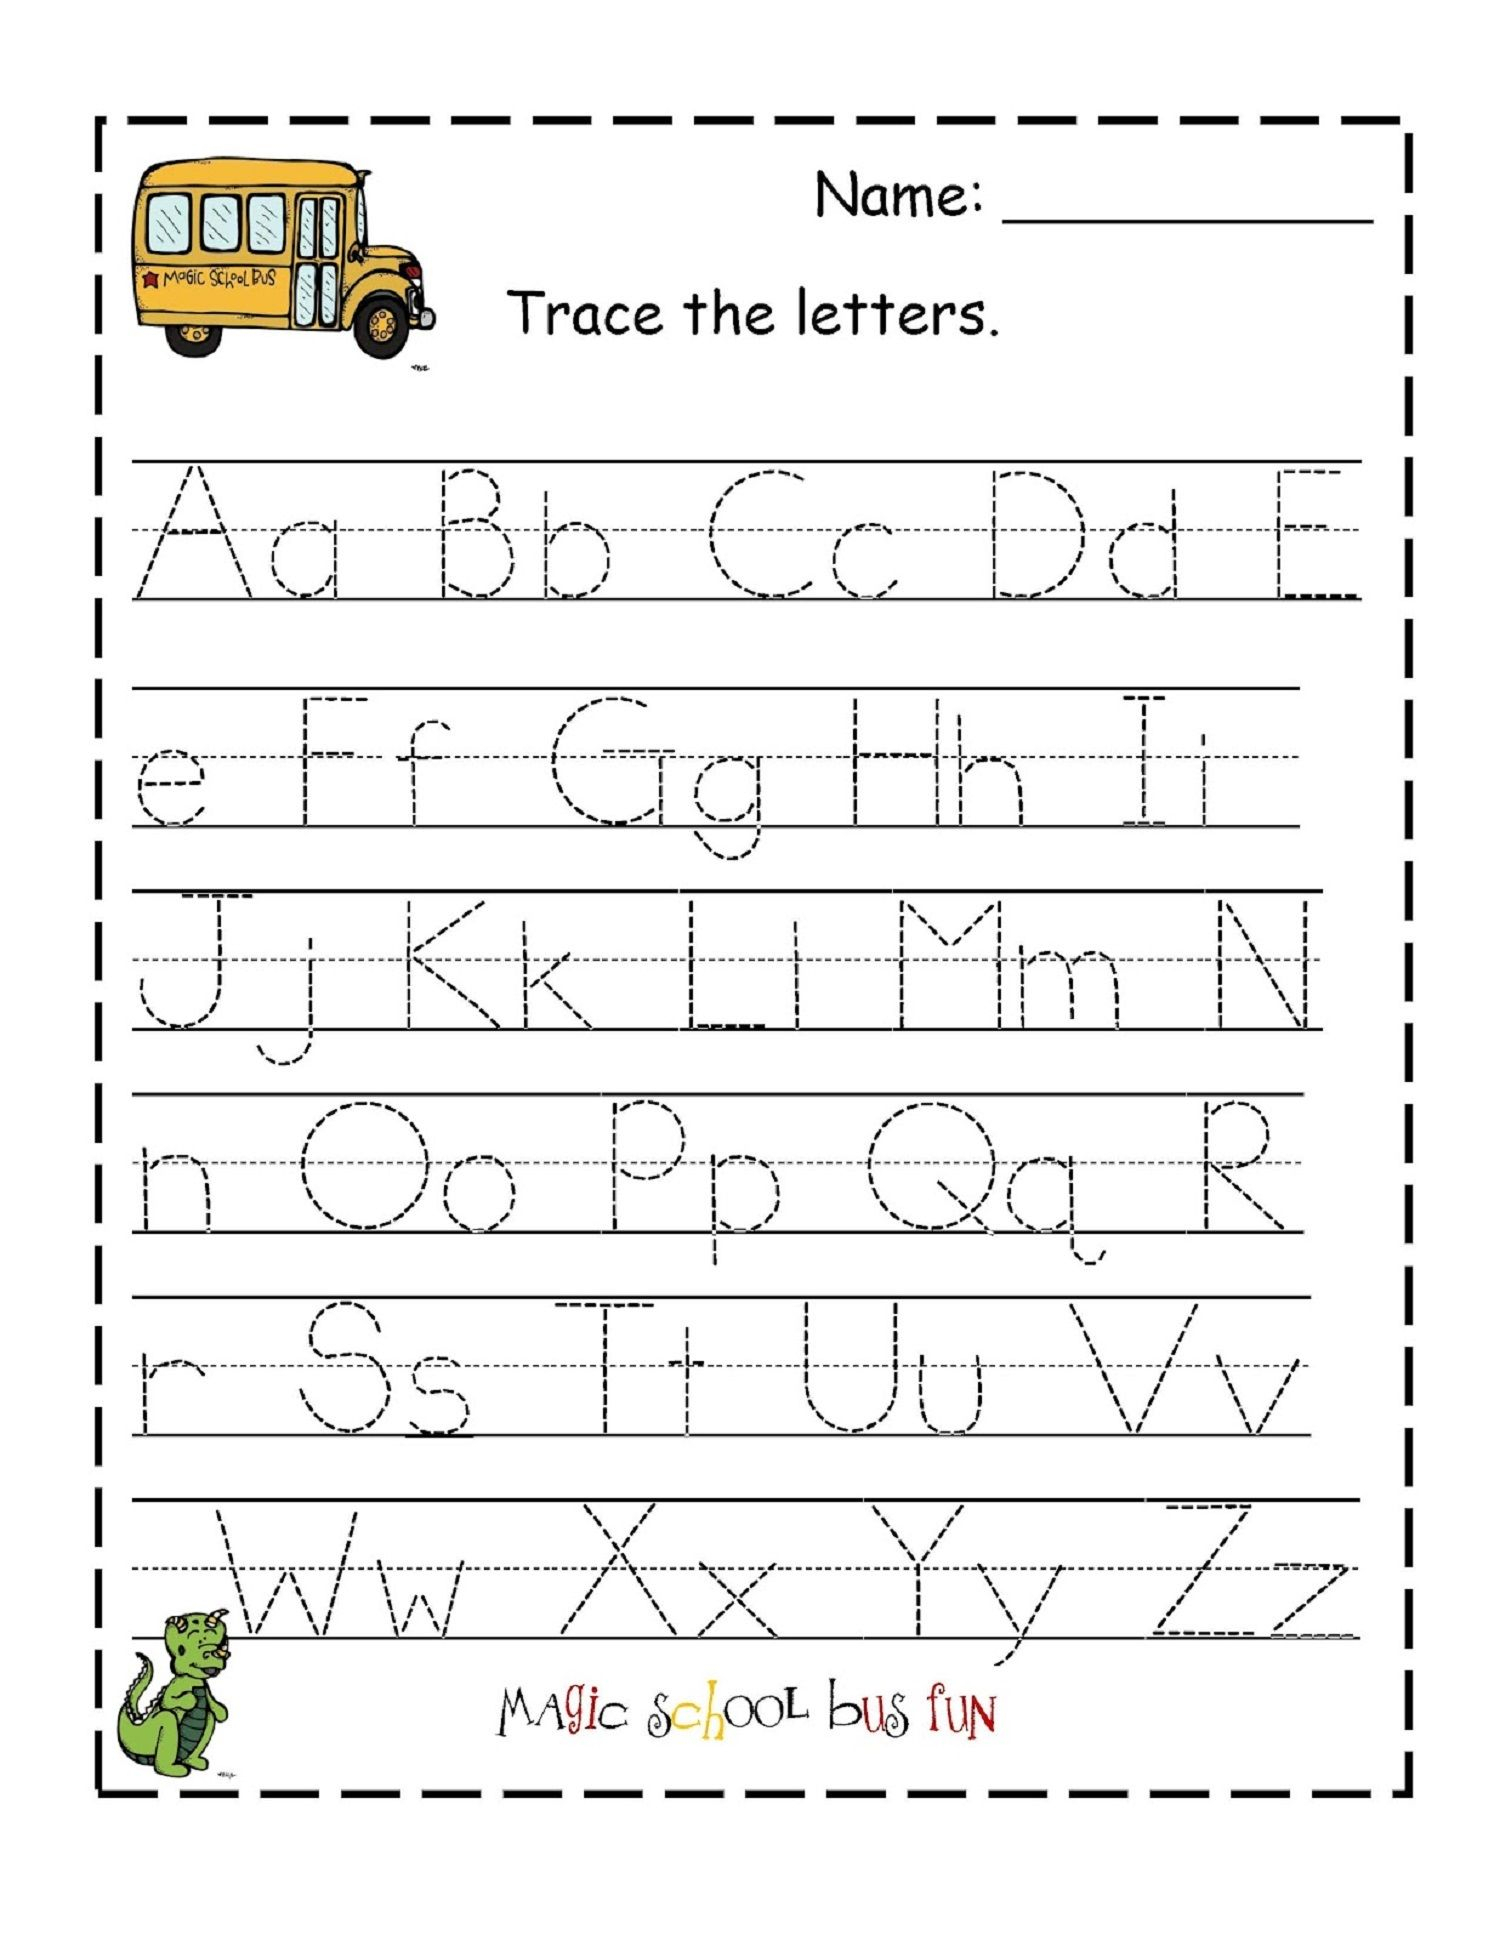 Traceable Alphabet For Learning Exercise | Letter Tracing in Dotted Letters For Tracing Font